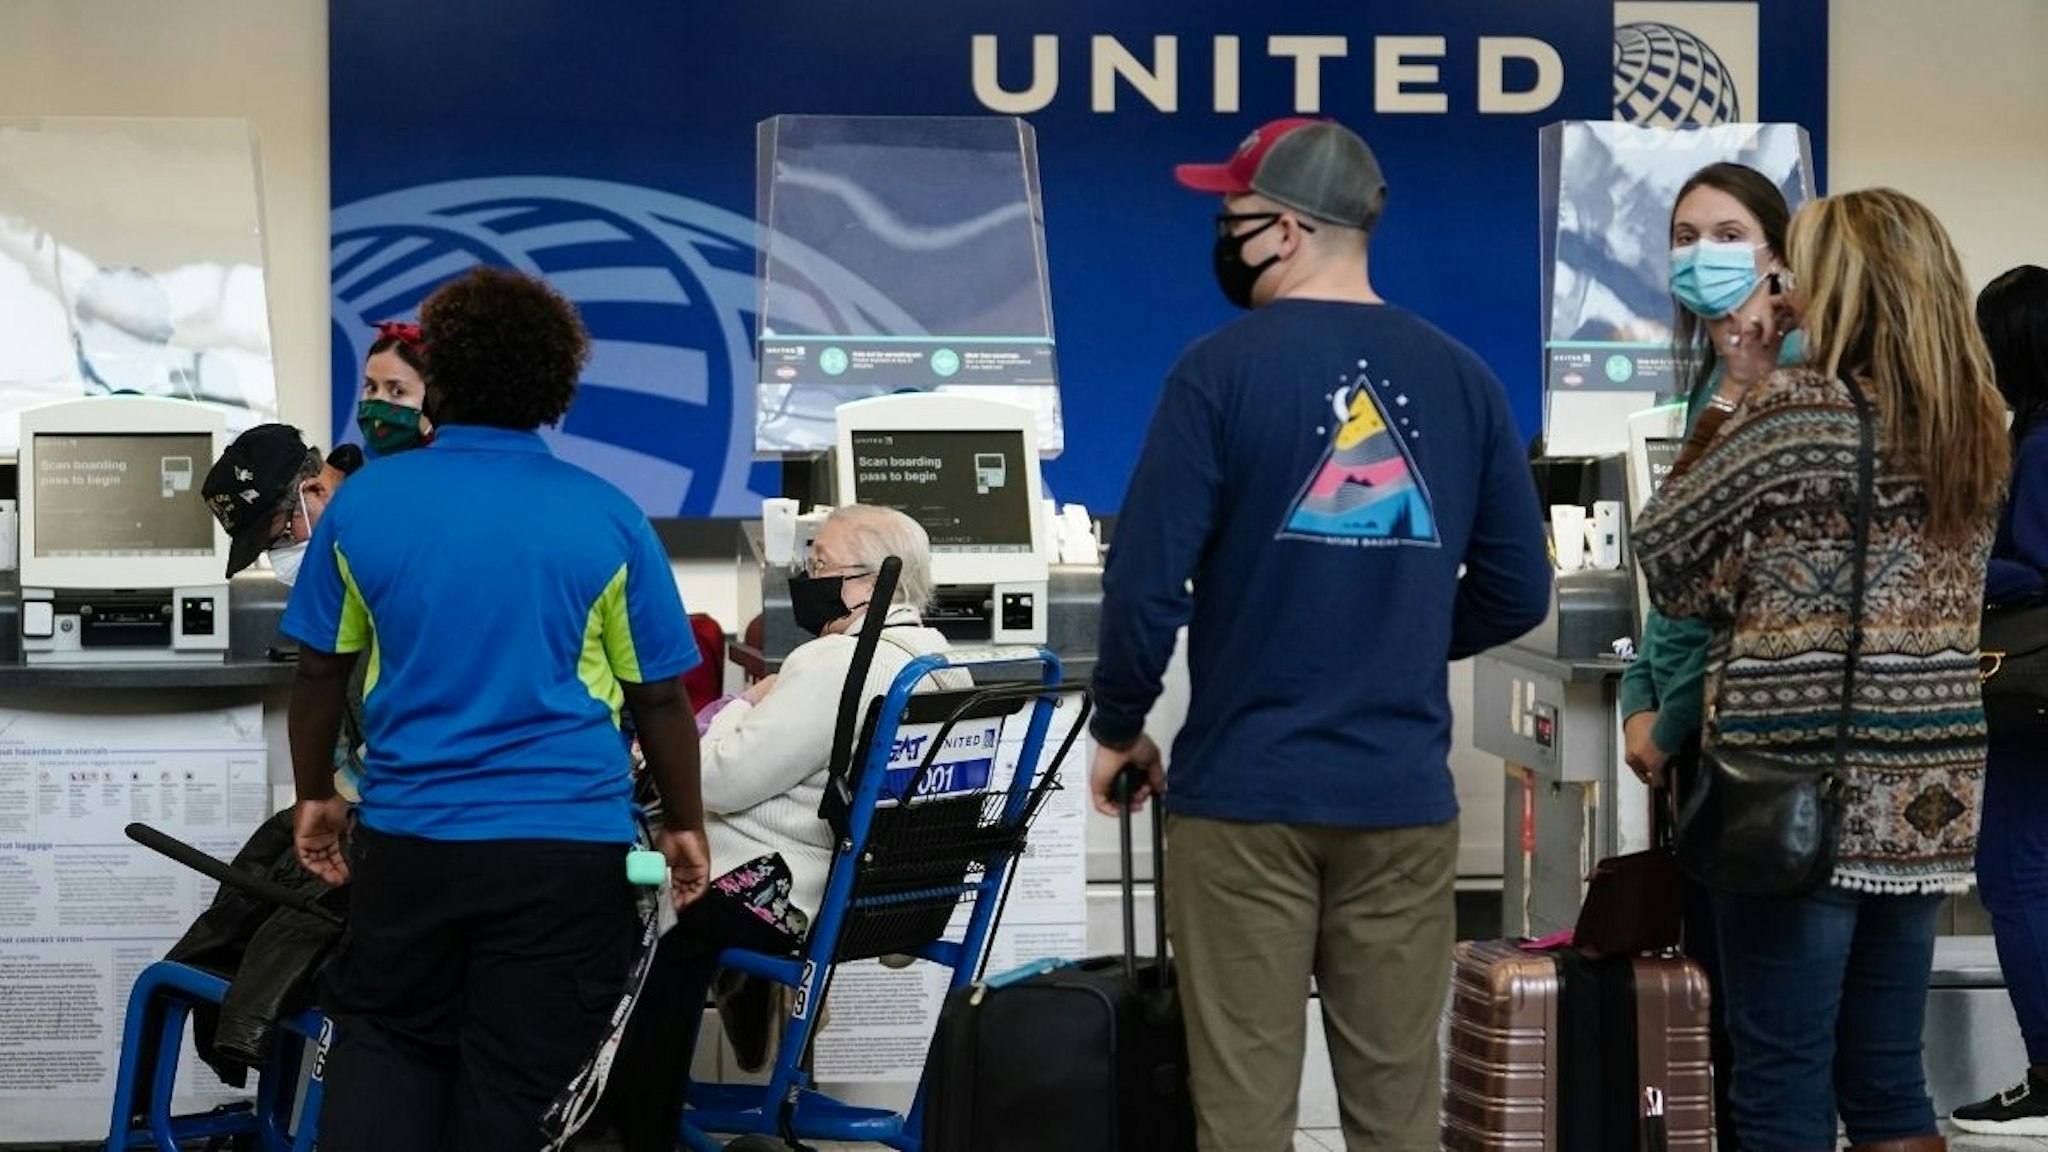 Travelers wait to check in at the United Airlines ticket counter at Hartsfield-Jackson Atlanta International Airport (ATL) in Atlanta, Georgia, U.S., on Monday, Dec. 27, 2021.